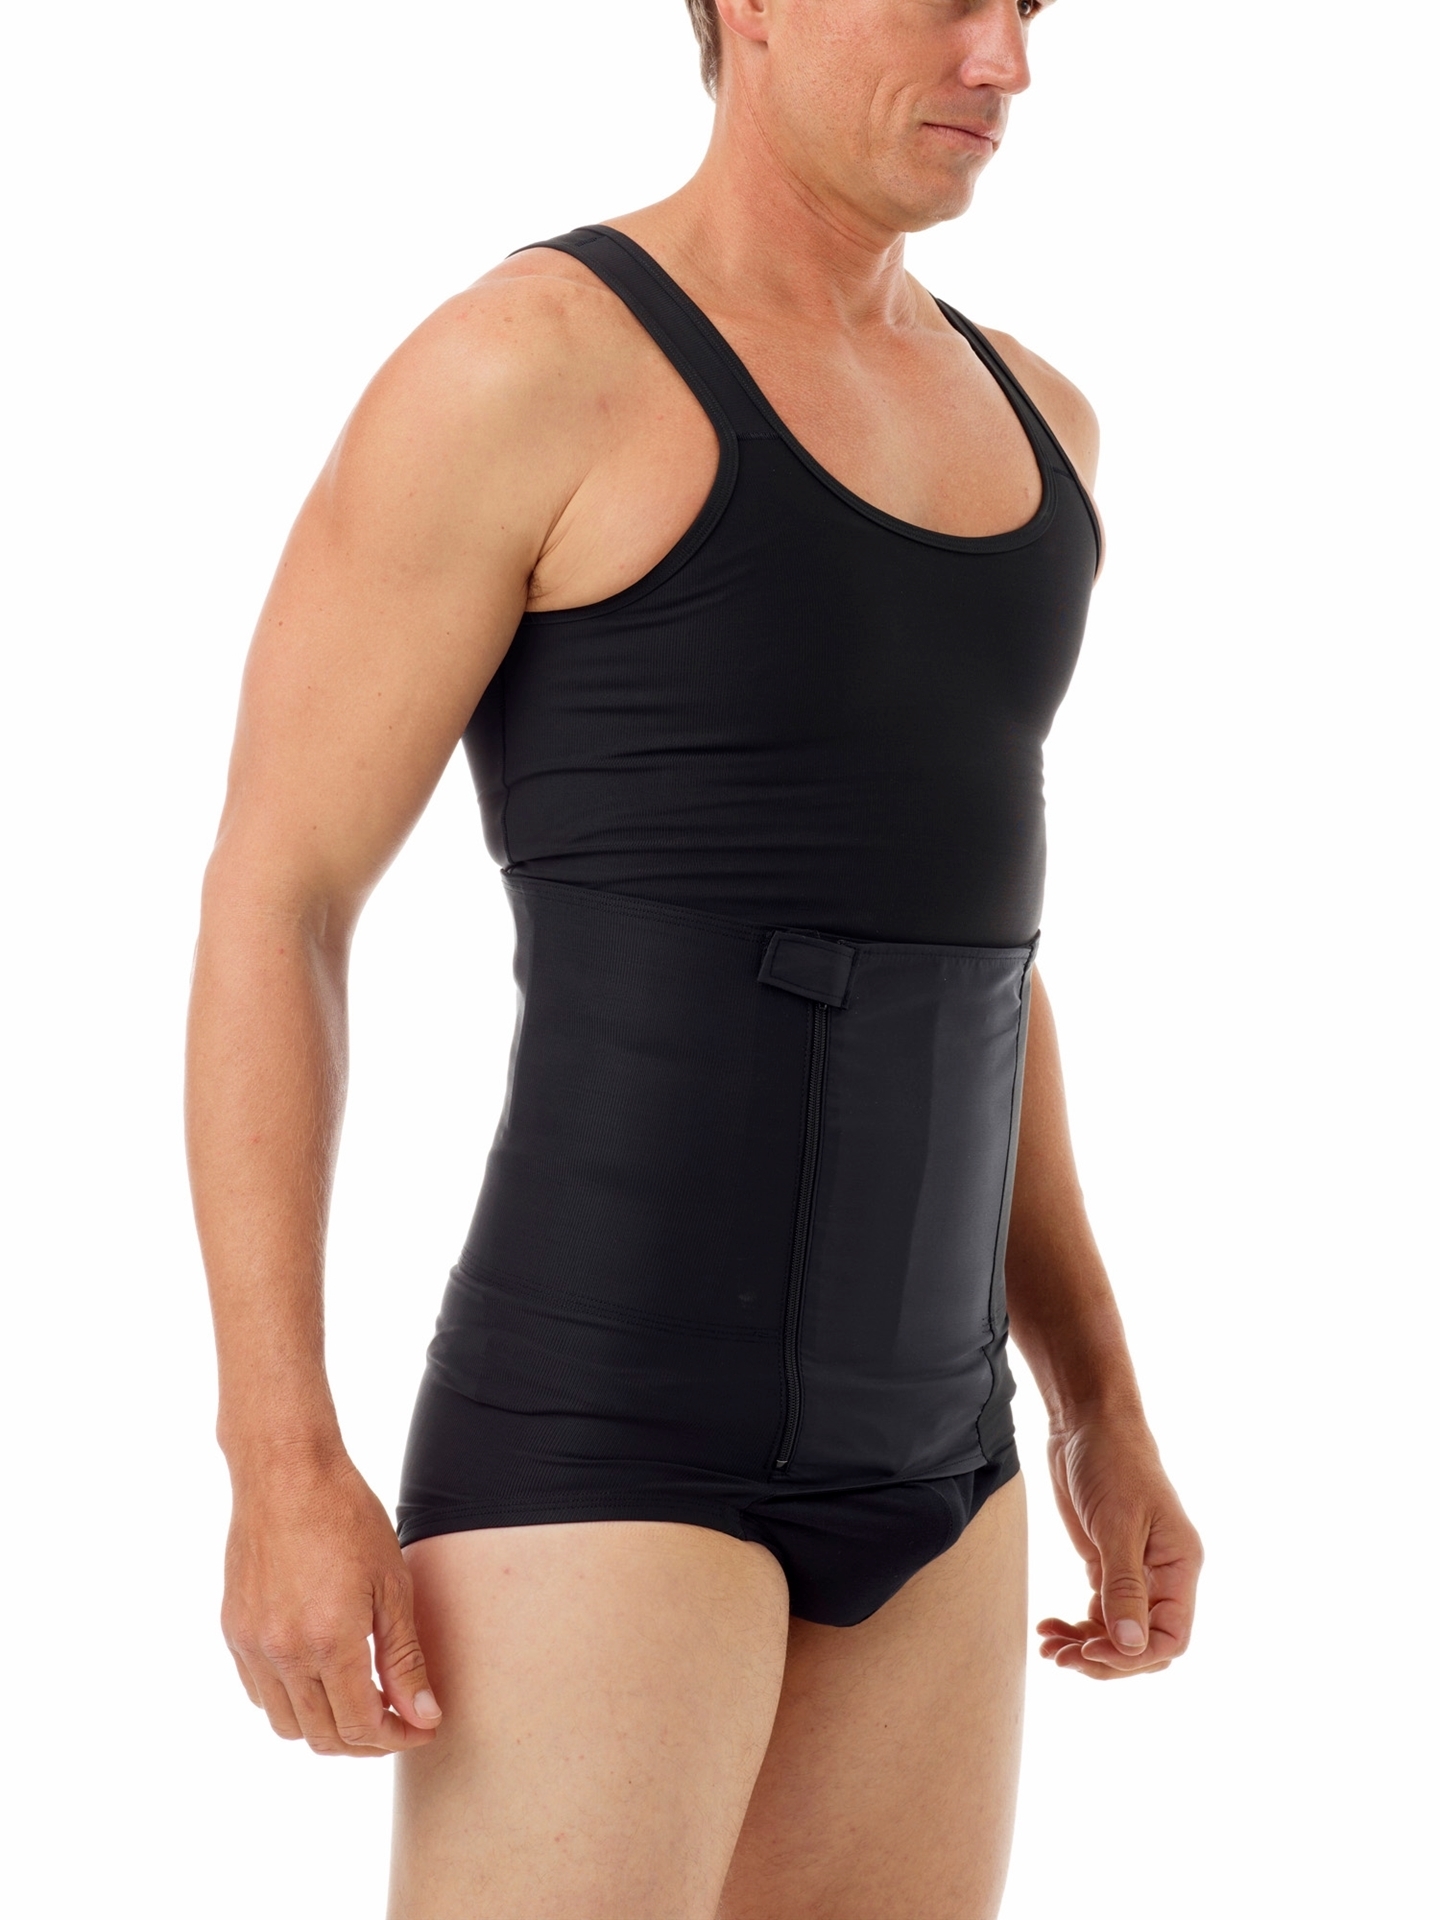 Men's Compression Body Shirt, Made in the USA, Shop Underworks Today